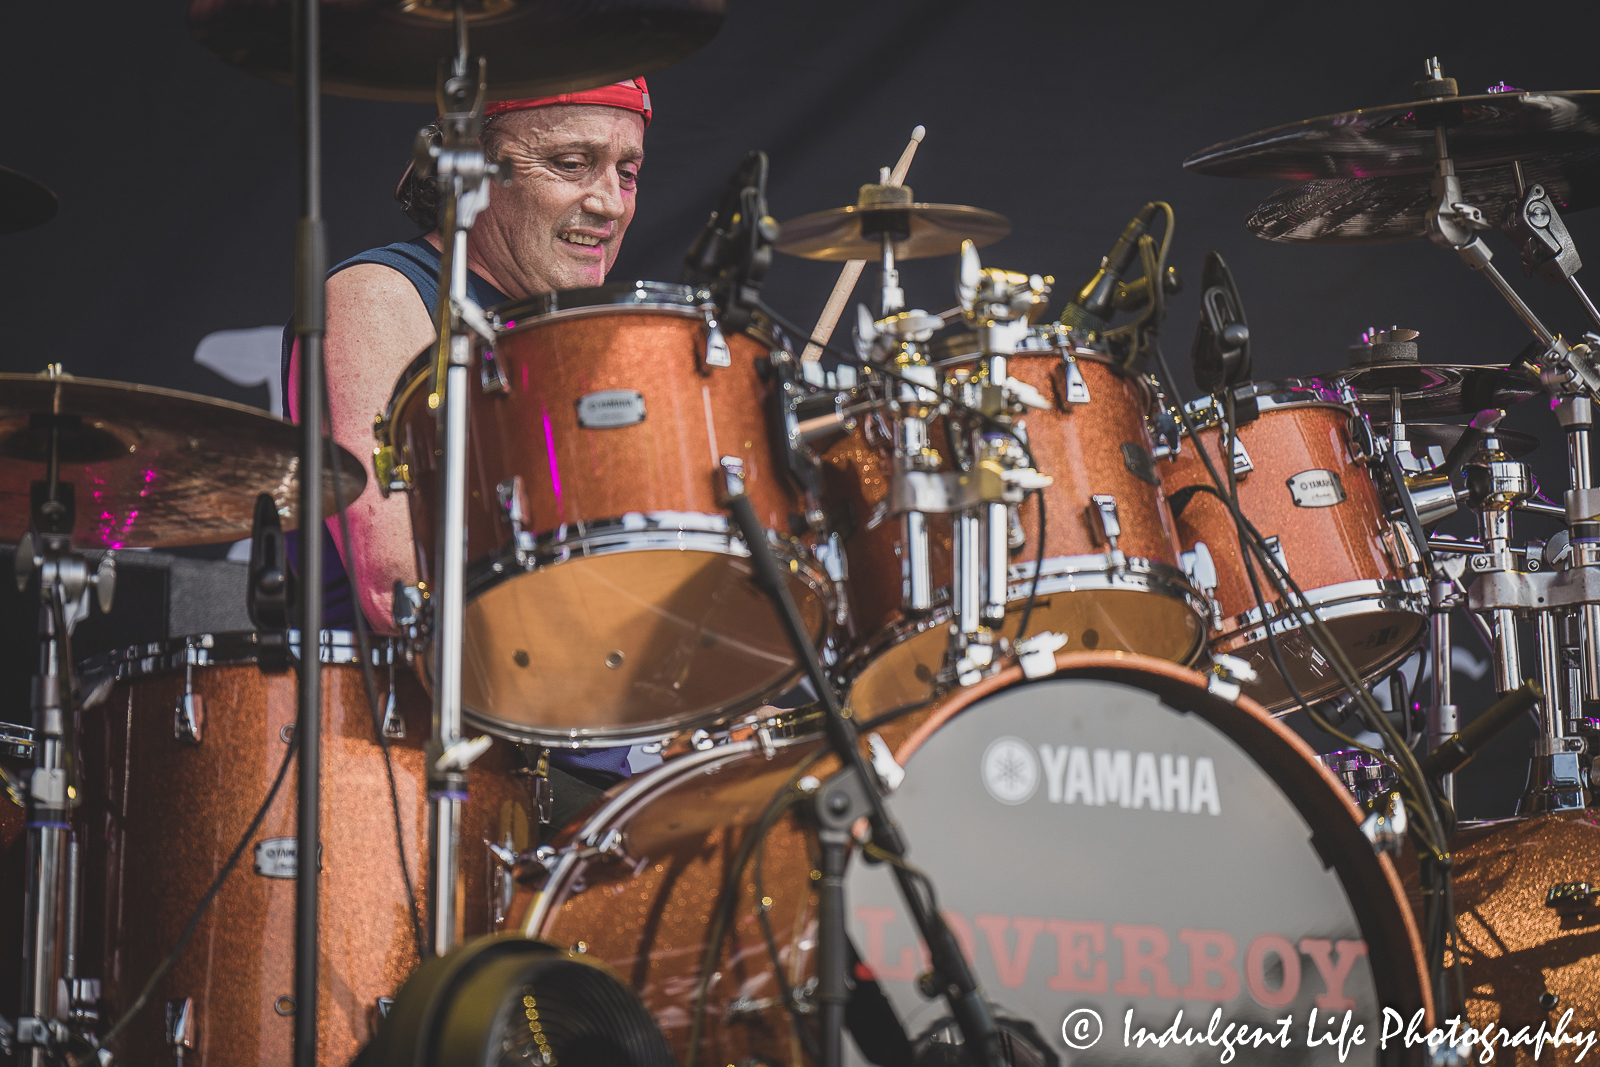 Loverboy drummer Matt Frenette playing live in concert at Starlight Theatre in Kansas City, MO on June 14, 2022.